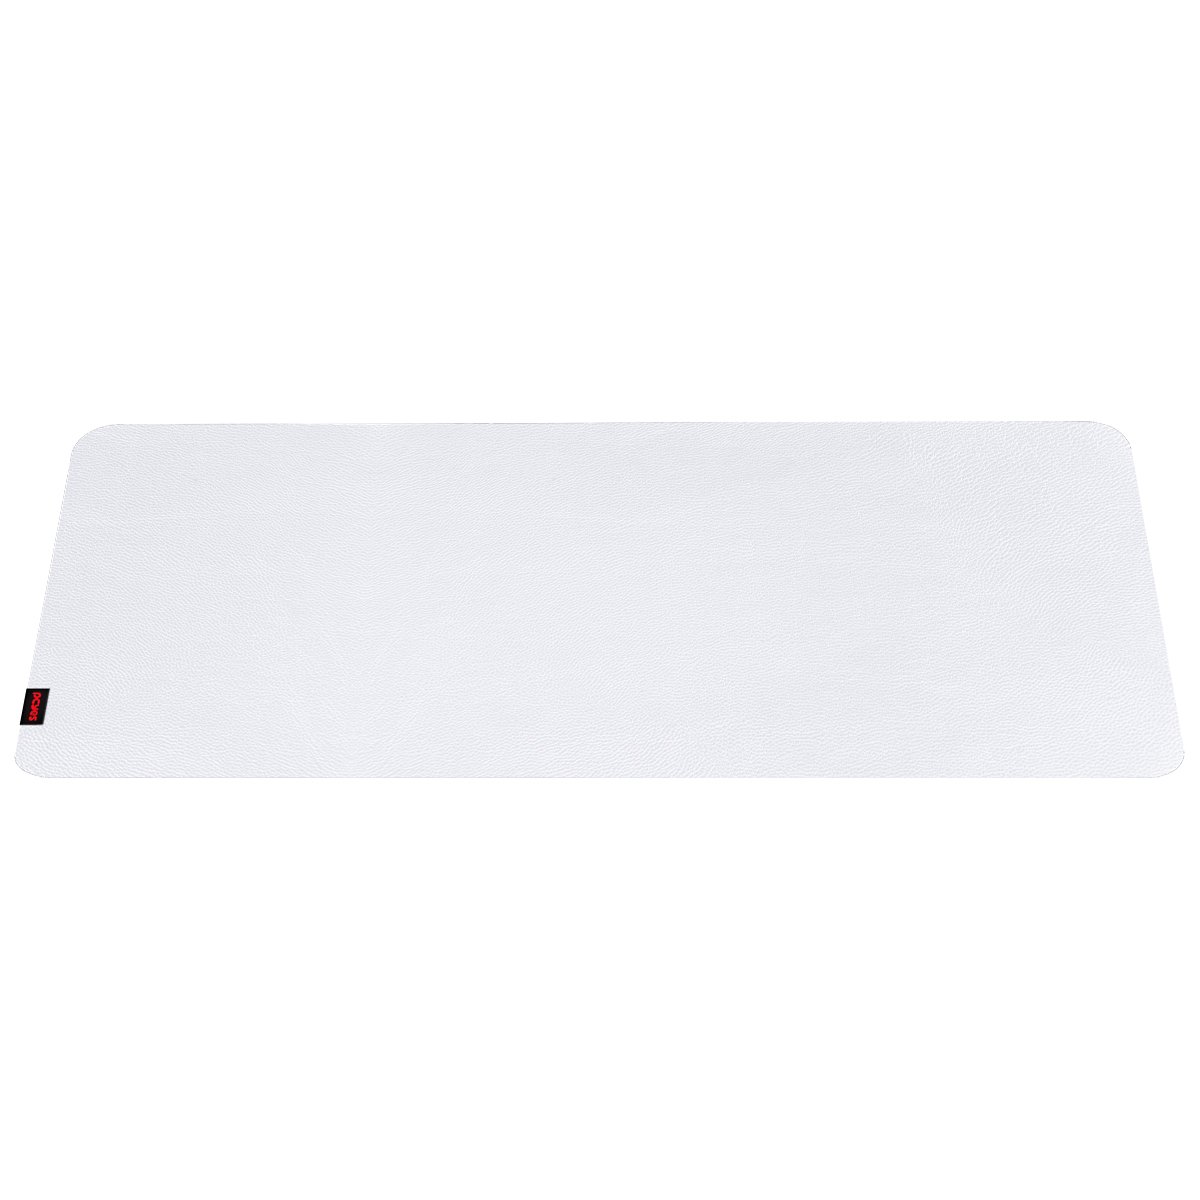 Mouse Pad Exclusive Branco 800x400 - Pmpexw - 4